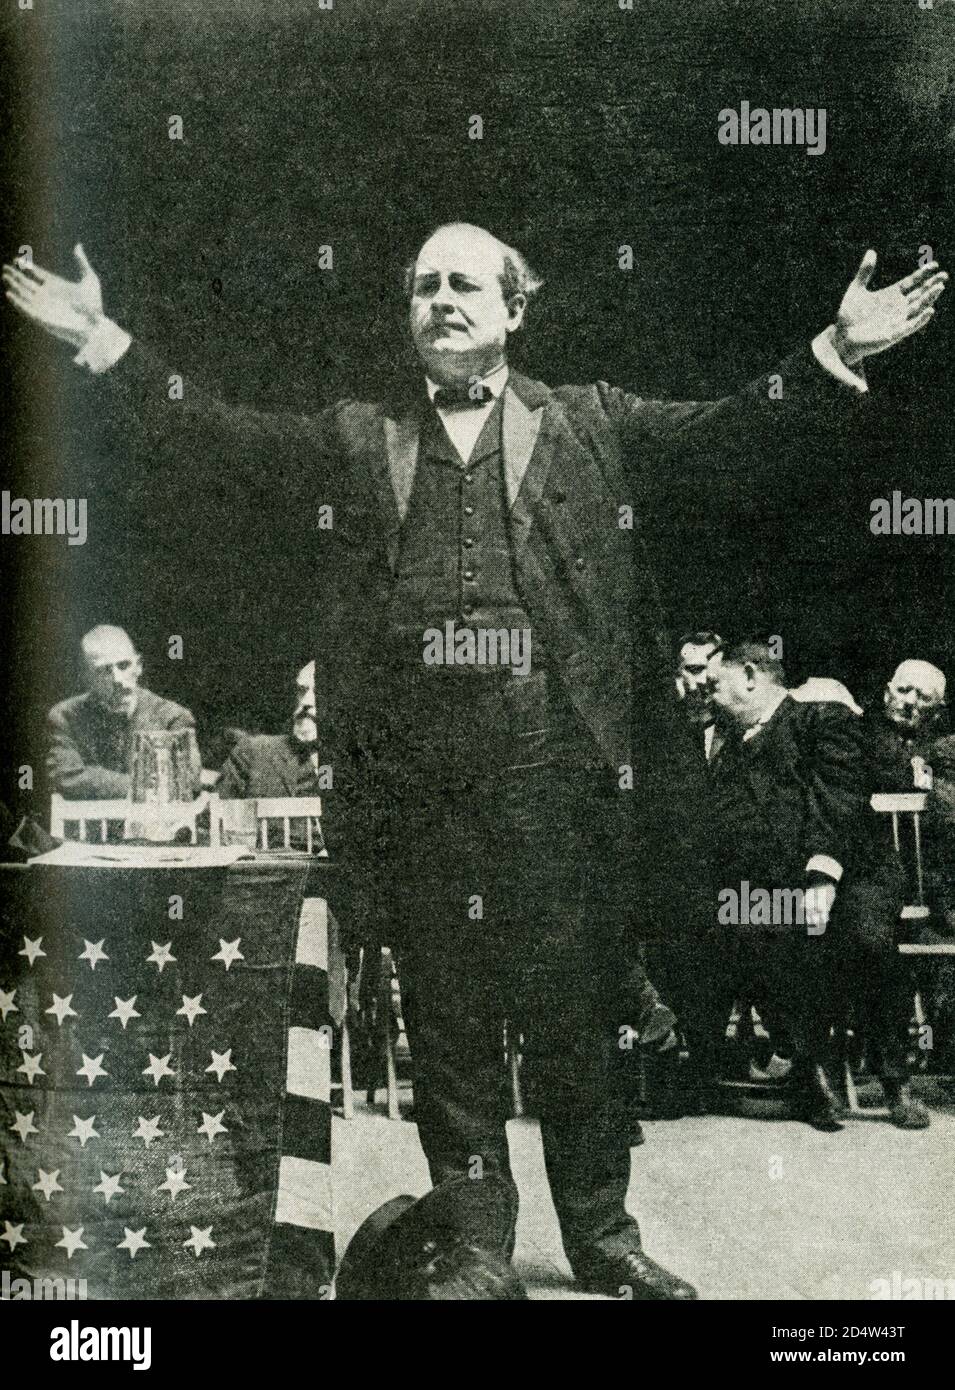 William Jennings Bryan (1860-1925)  was an American orator and politician from Nebraska. Beginning in 1896, he emerged as a dominant force in the Democratic Party, running three times as the party's nominee for President of the United States in the 1896, 1900, and 1908 elections. Bryan's efforts on behalf of farmers and laborers (the so-called 'common' people) earned him the title the 'Great Commoner.' Stock Photo